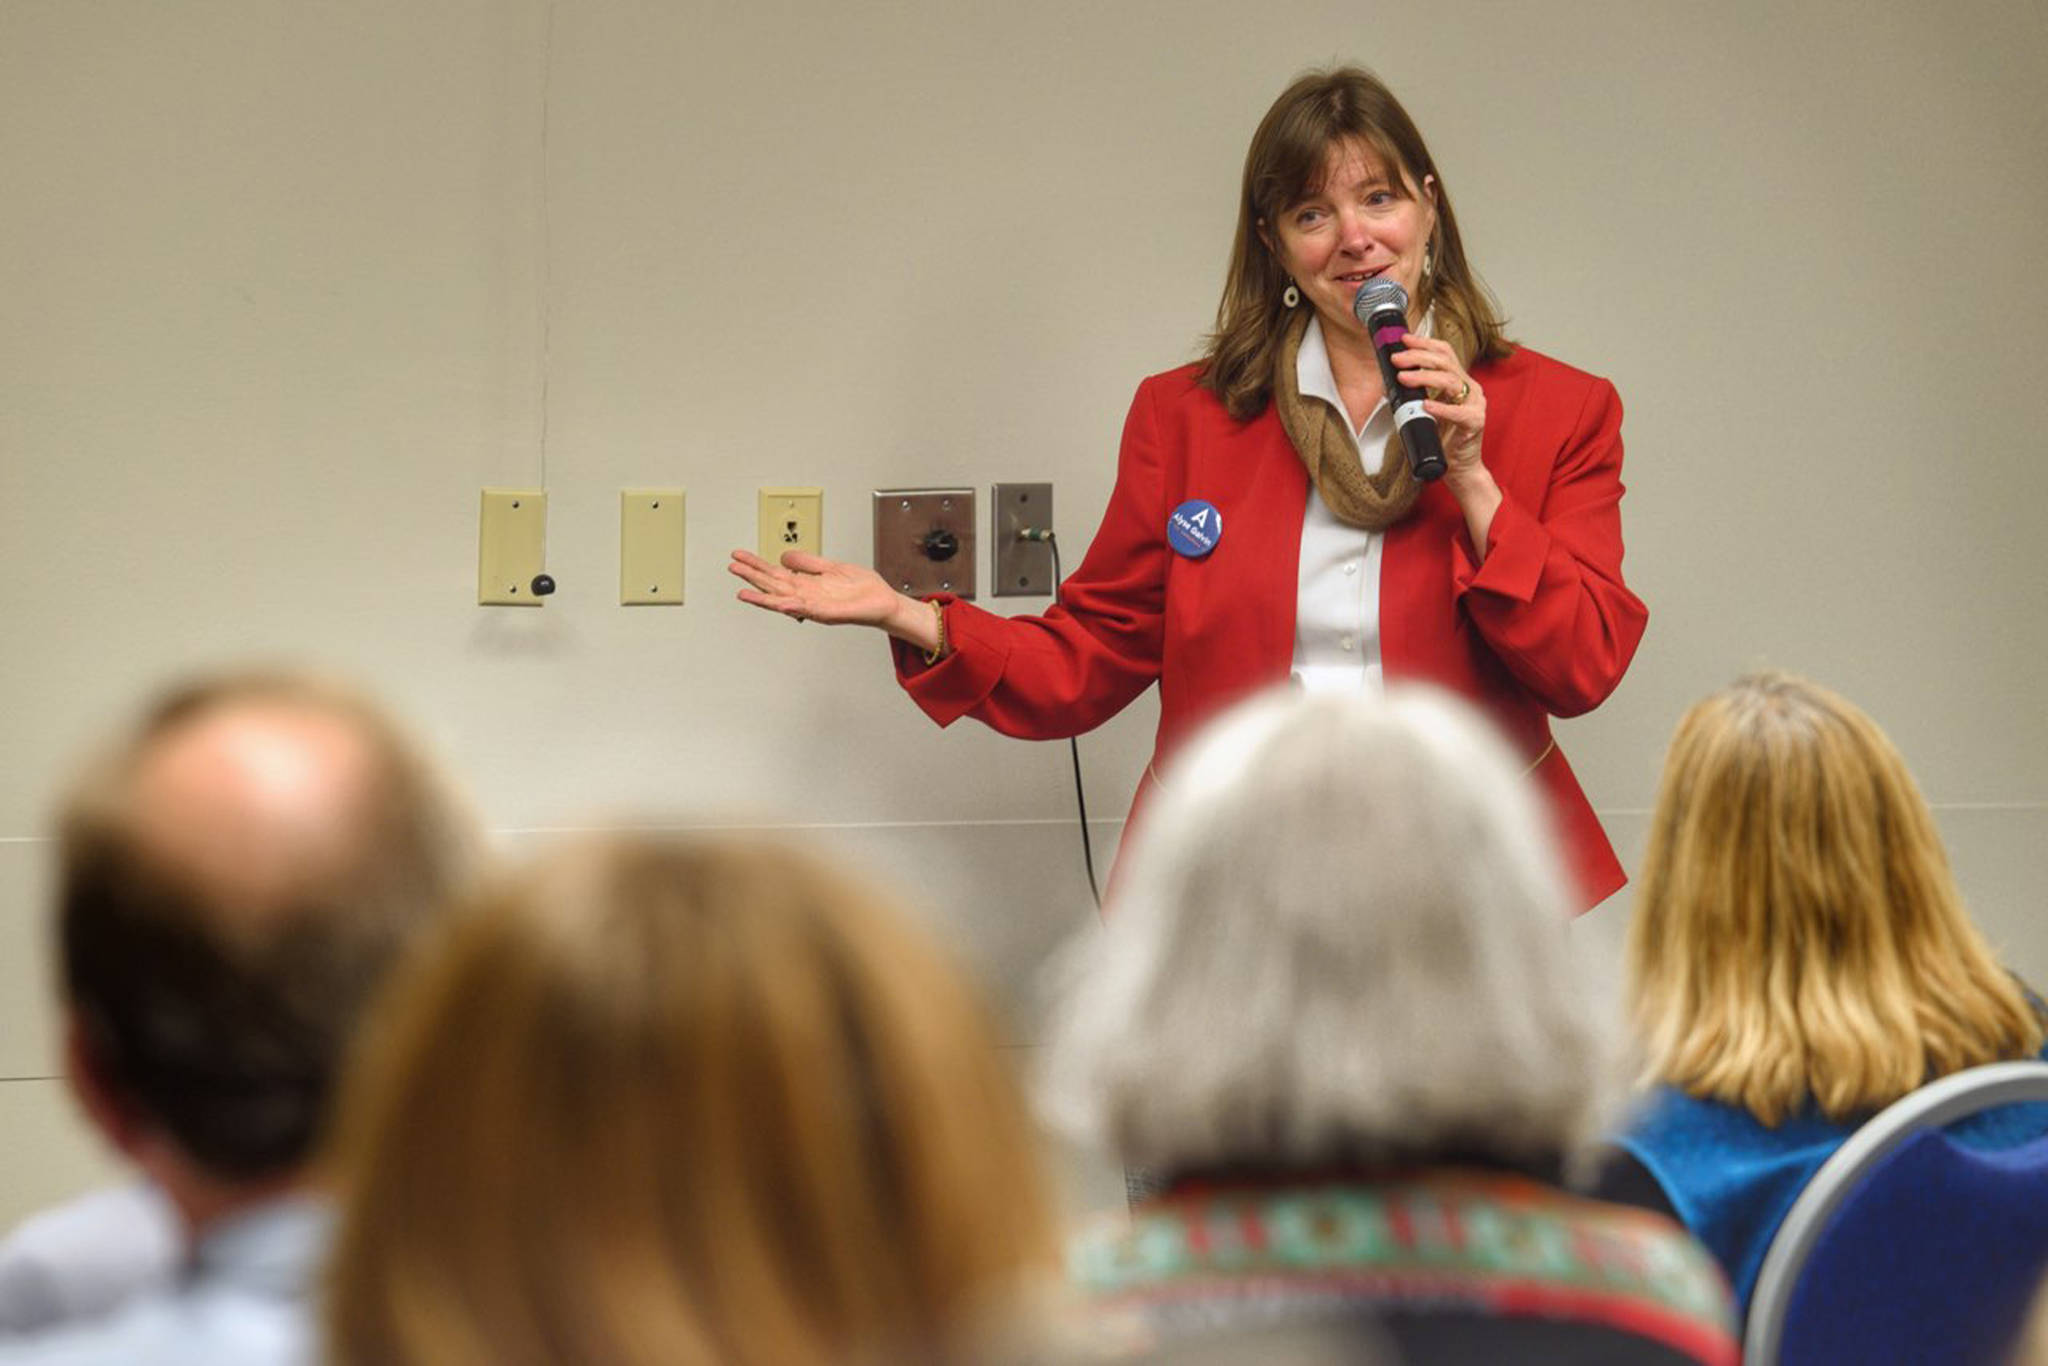 Alyse Galvin, Alaska’s independent candidate for U.S. House of Representatives, holds a town hall-style meeting to an overflowing room at Centennial Hall on Sunday, Oct. 21, 2018. (Michael Penn | Juneau Empire)